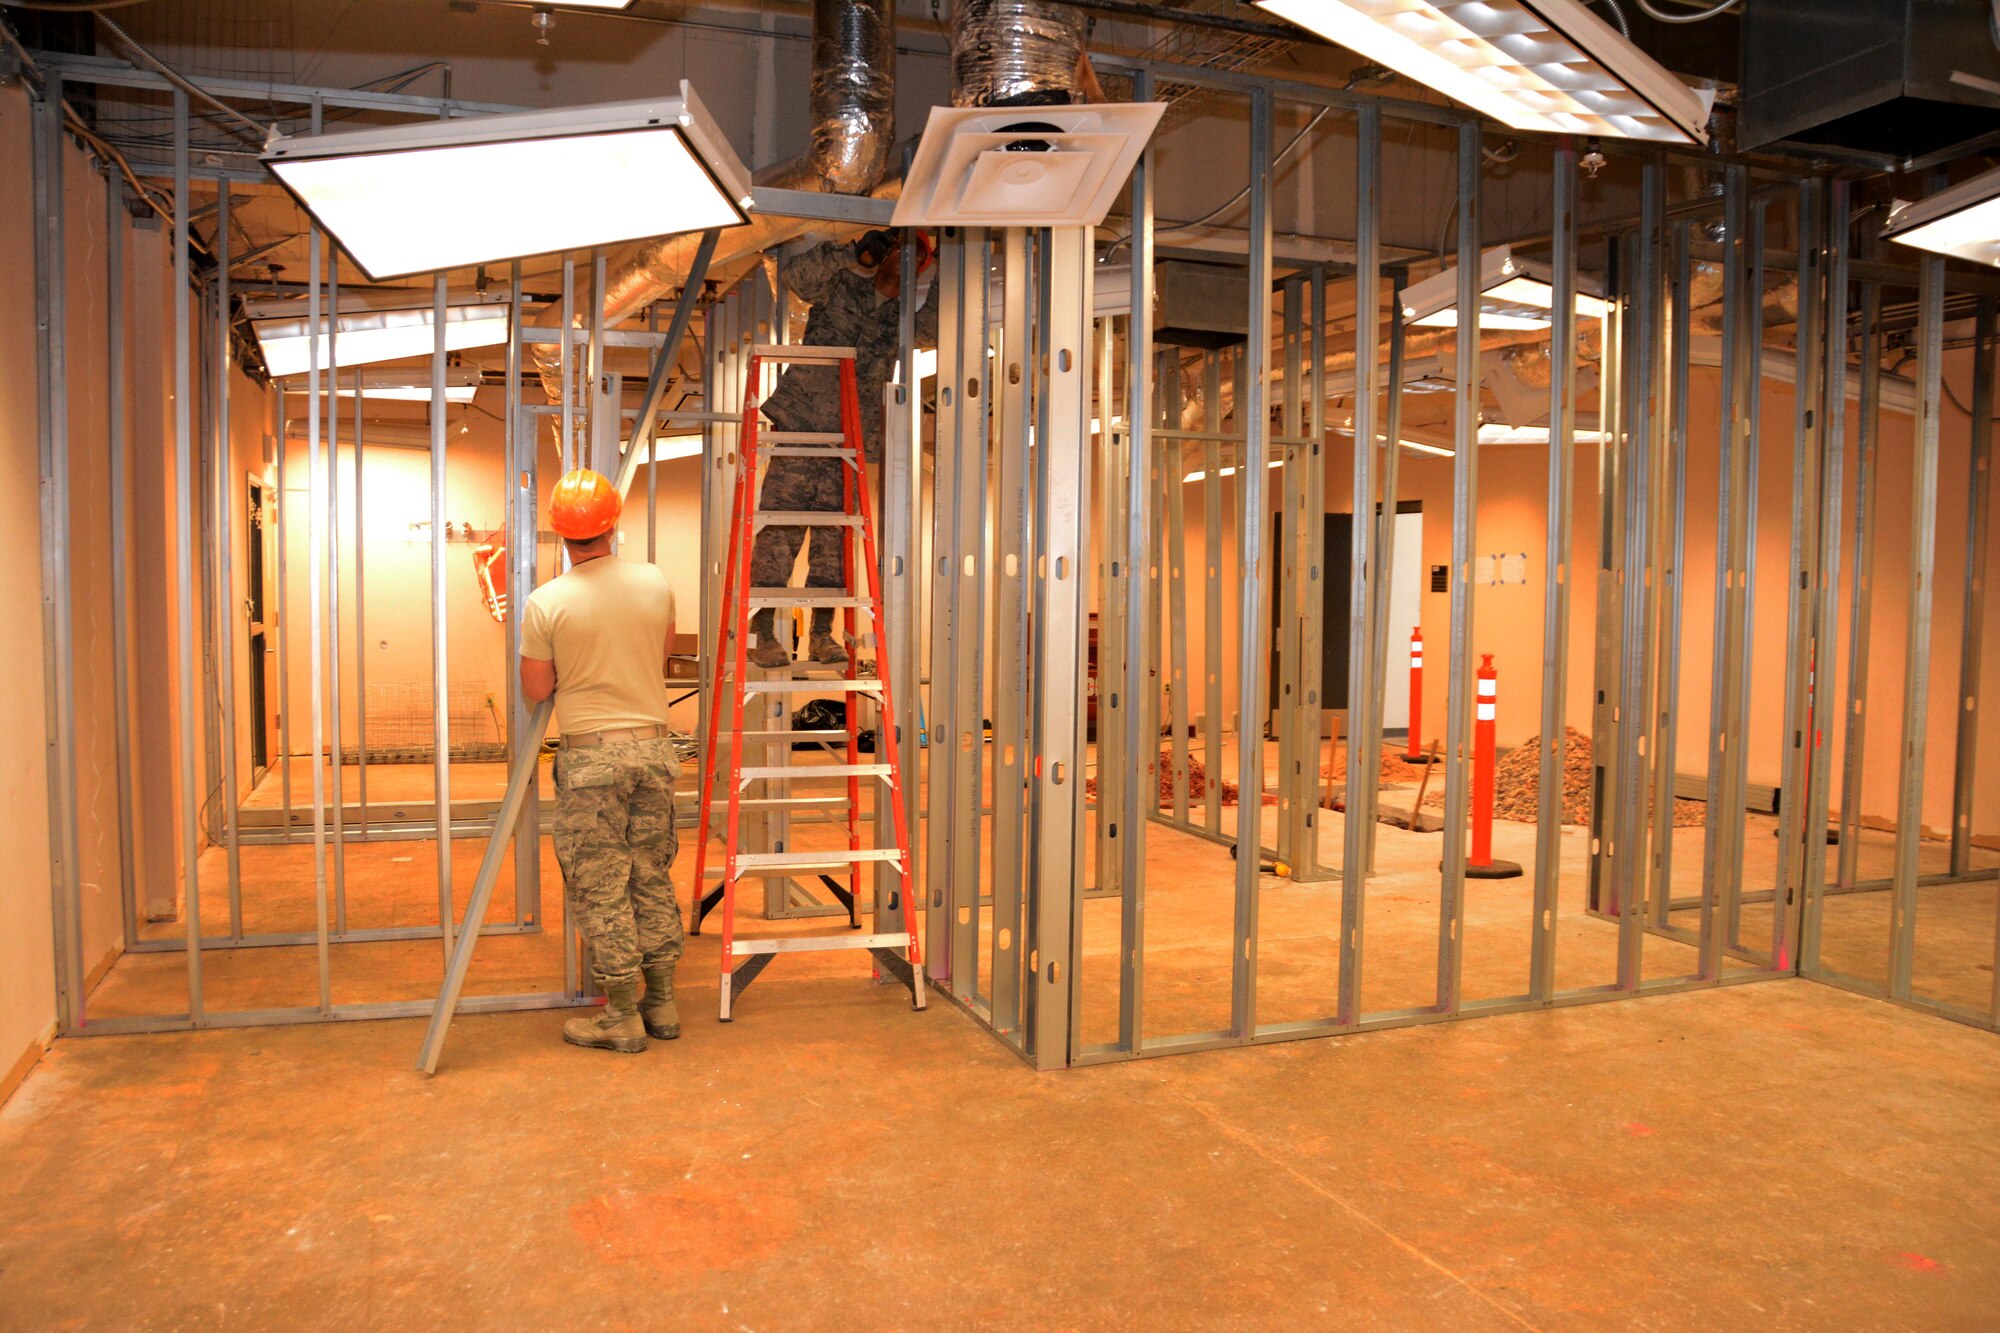 Reservists with the 507th Civil Engineer Squadron frame out walls in the new emergency communications center in Bldg. 7017 Nov. 21, 2016, at Tinker Air Force Base, Okla. Construction on the 1,500 sq. ft. emergency communications center is expected to be completed by April 1, 2017. (U.S. Air Force photo/Tech. Sgt. Lauren Gleason)